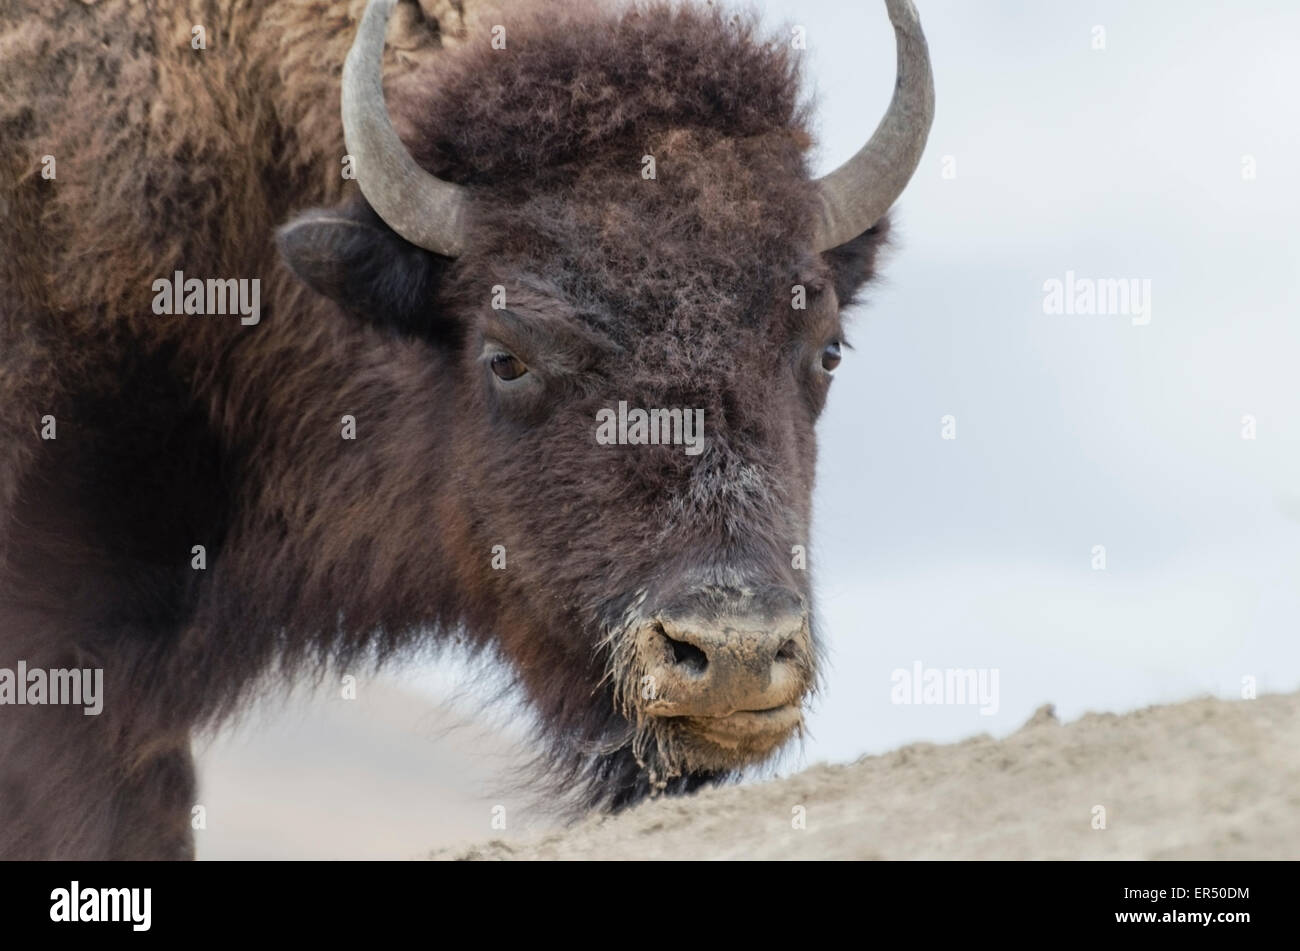 American Bison or American Buffalo (Bison bison) bull at a mineral lick. Bison are the largest terrestrial animals in North Amer Stock Photo